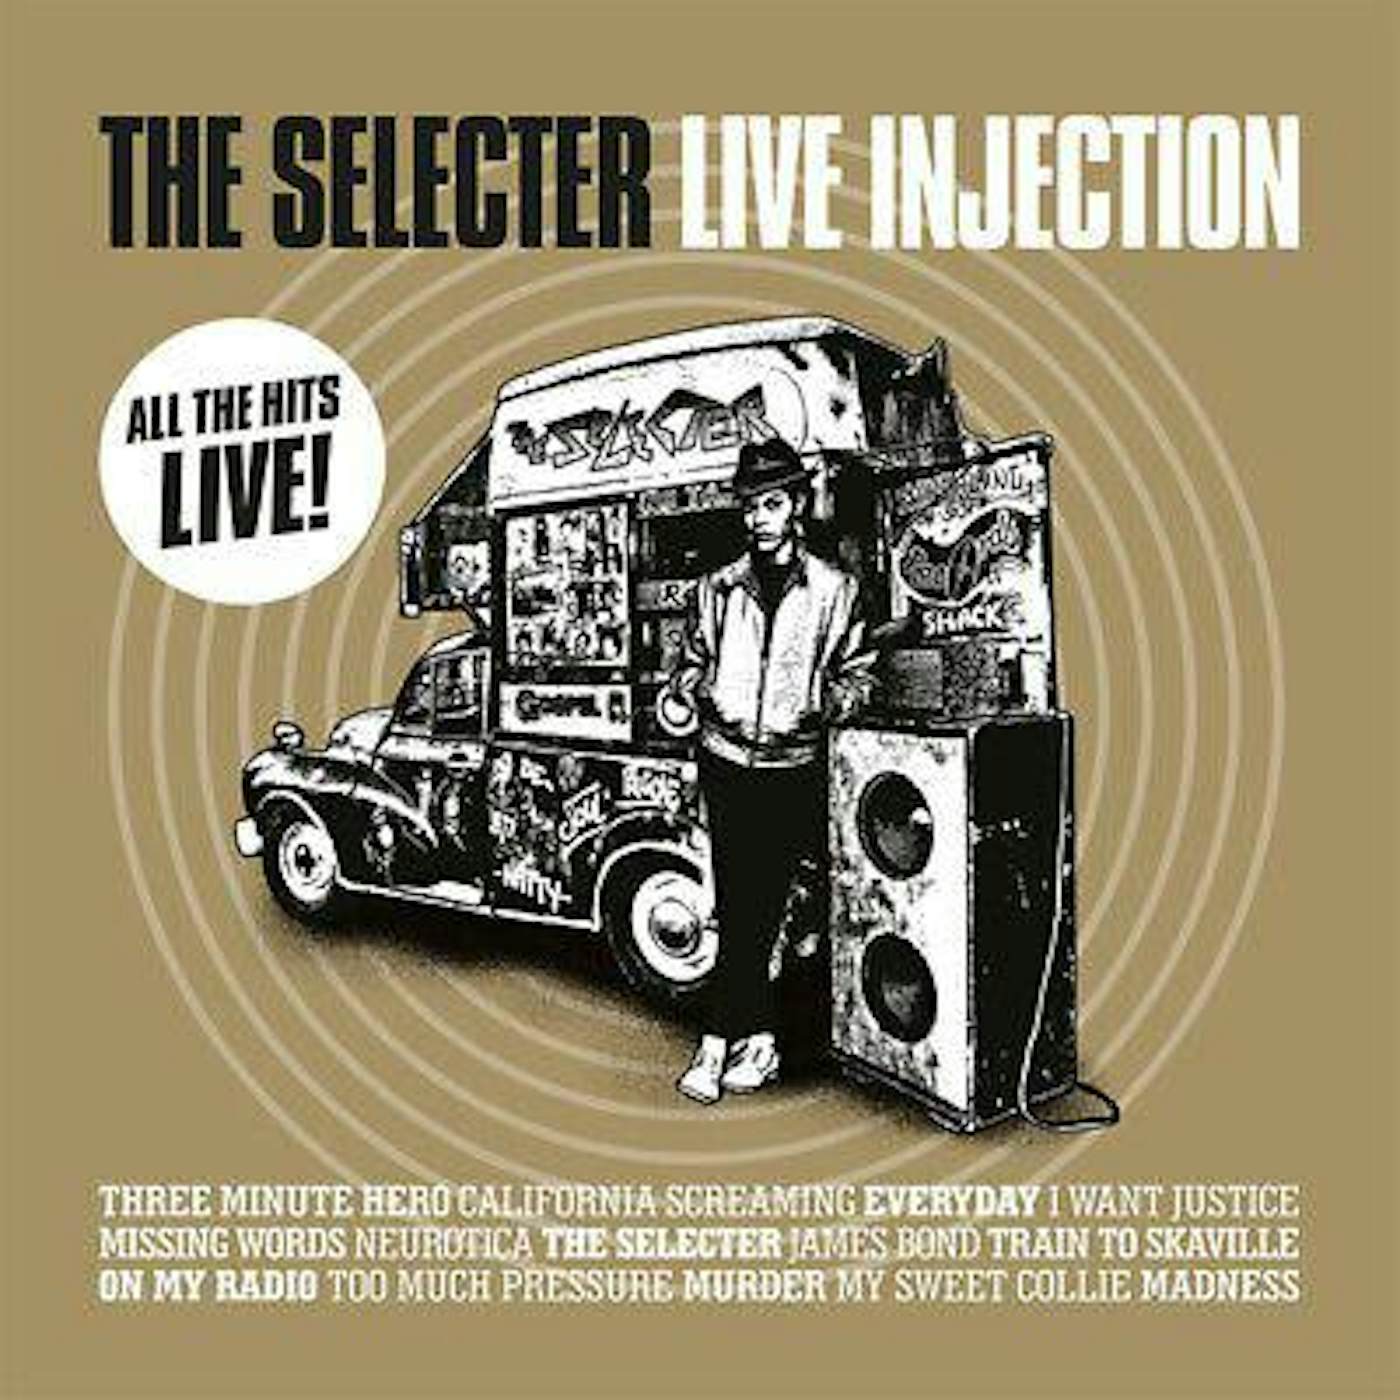 Selecter Live Injection (White Vinyl Record)